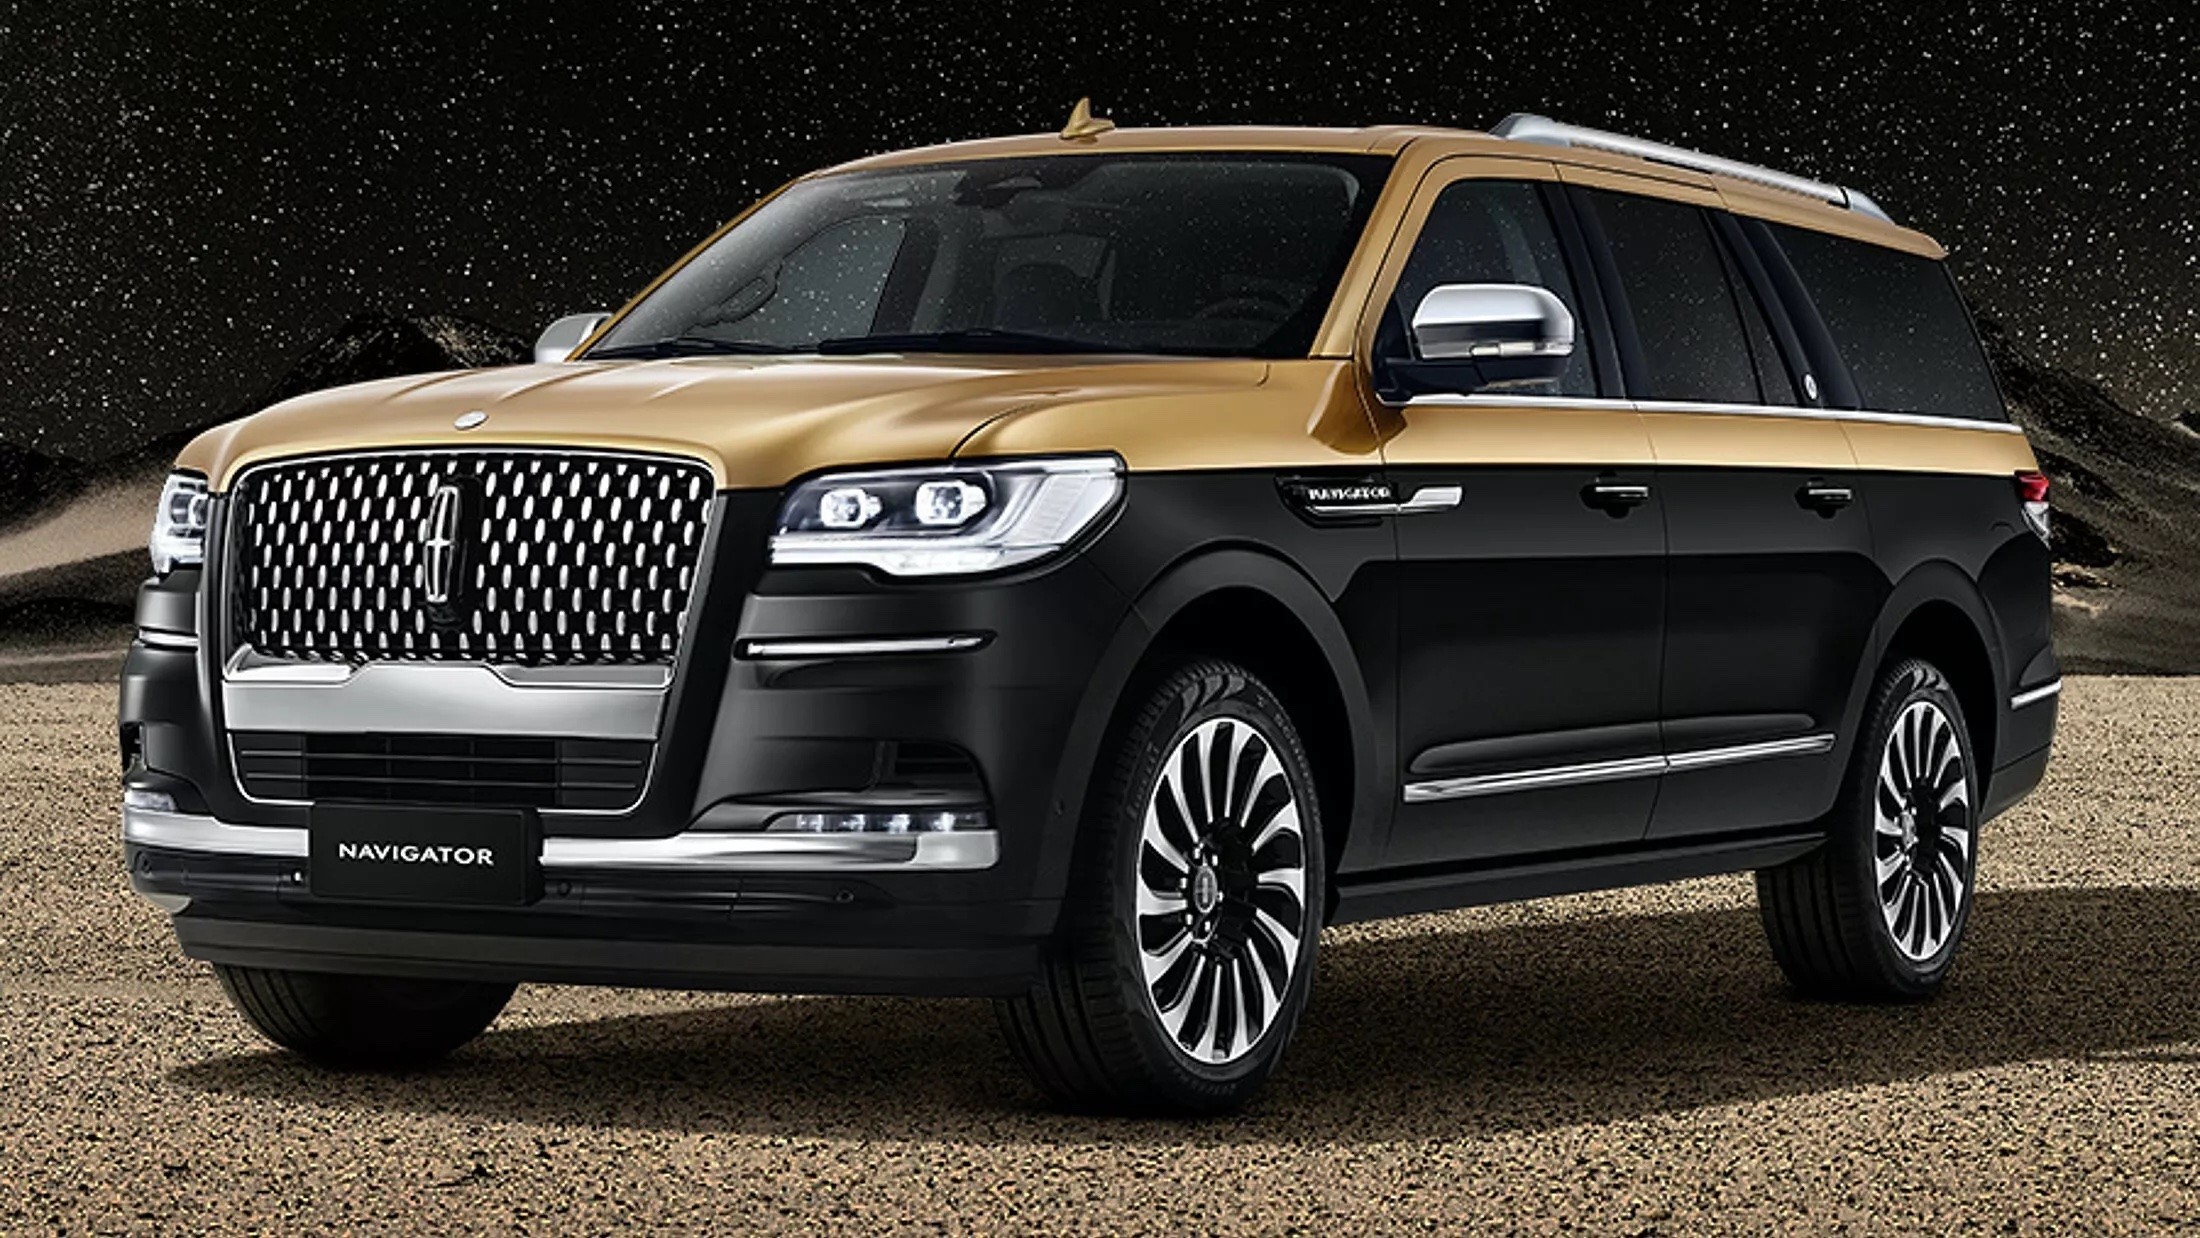 Lincoln Navigator Black Gold Edition Is the SUV That America Will Only